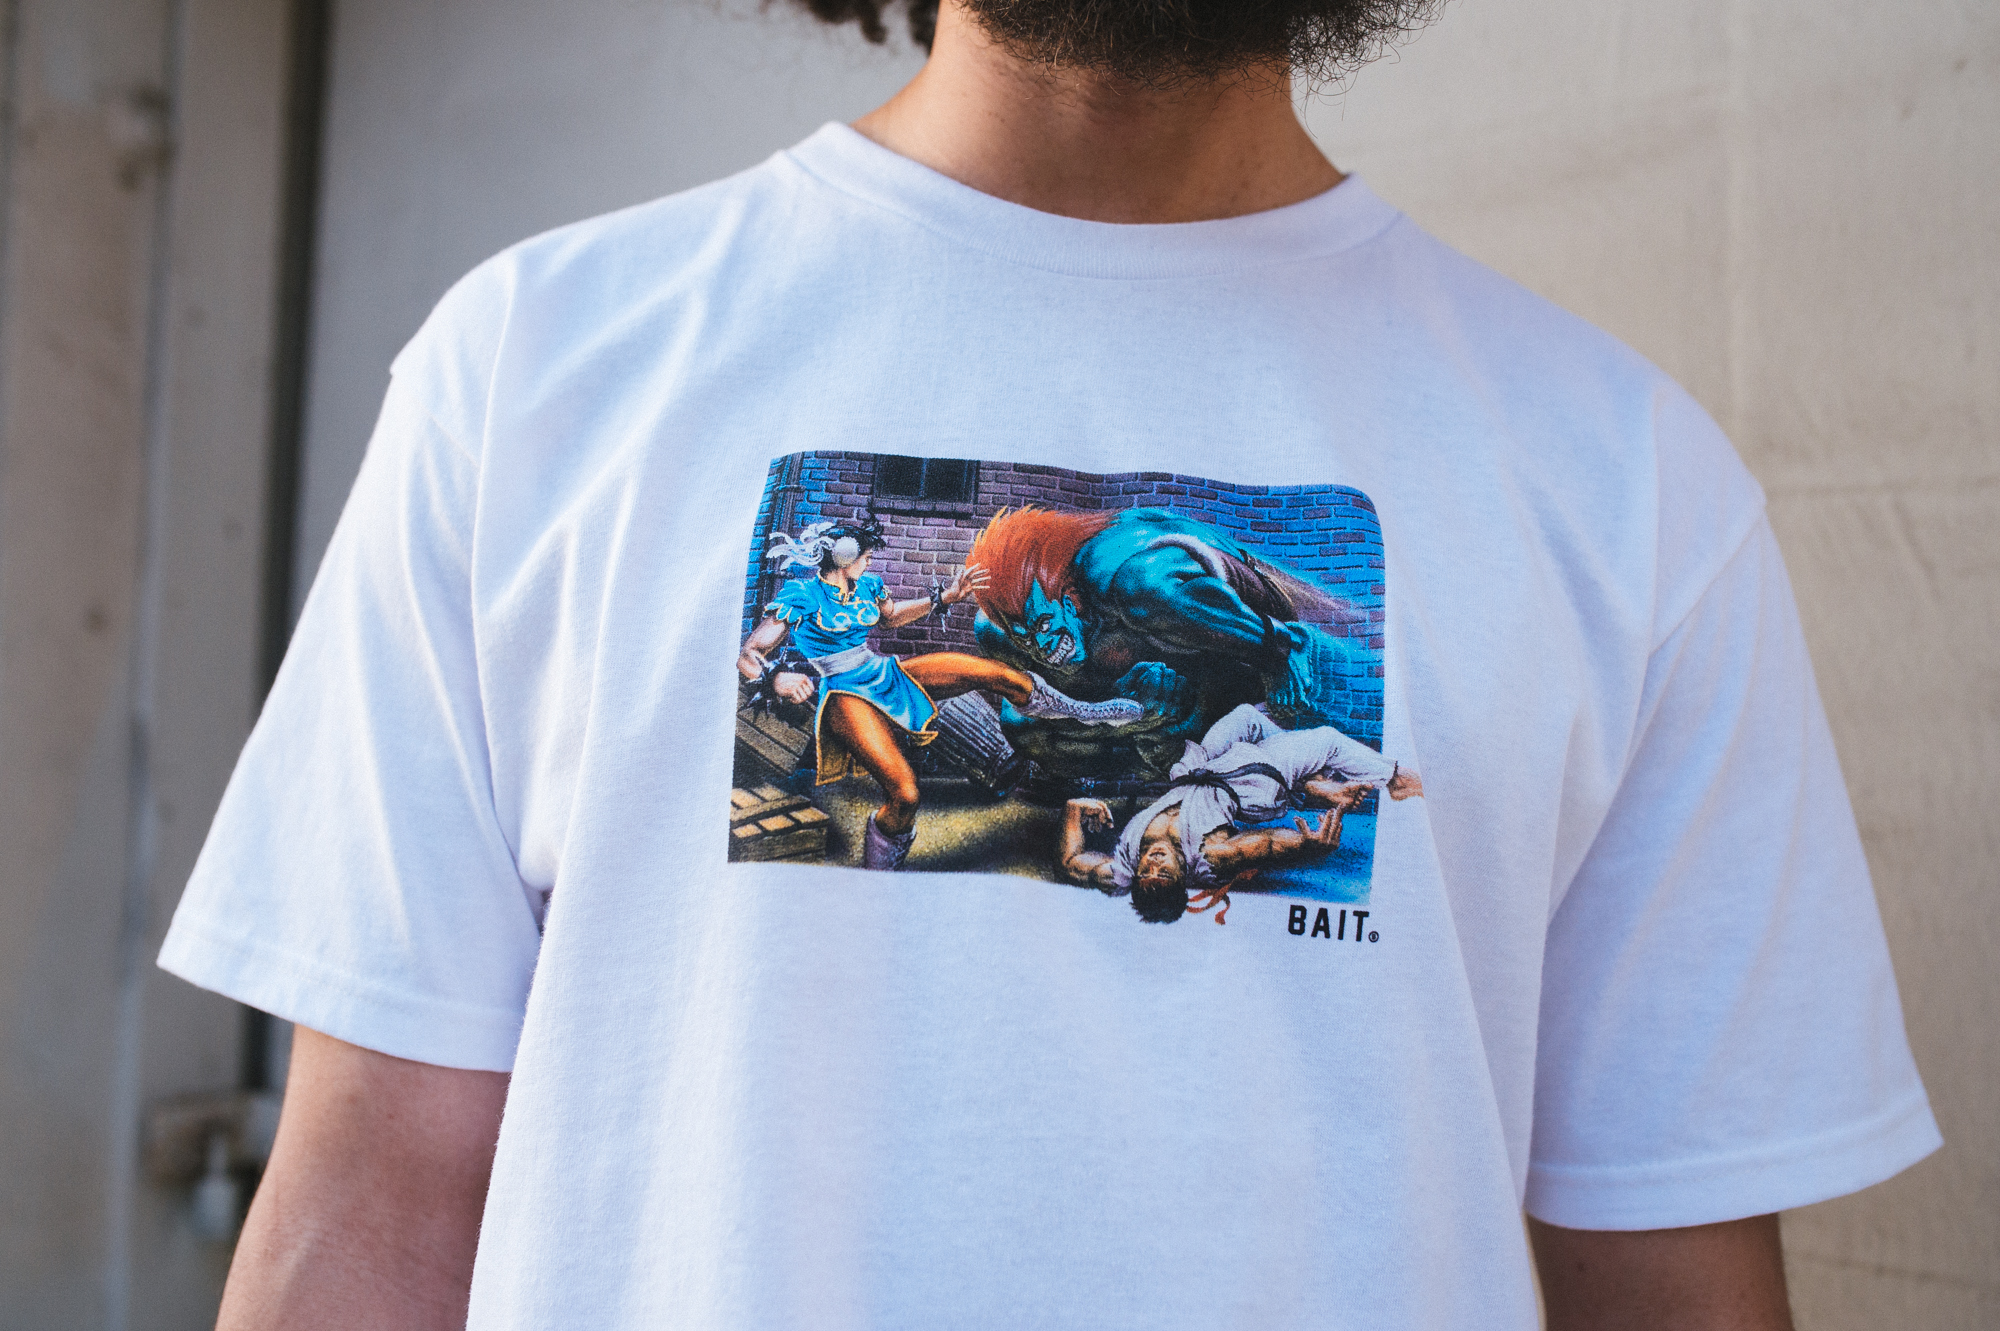 BAIT STREET FIGHTER apparel collection